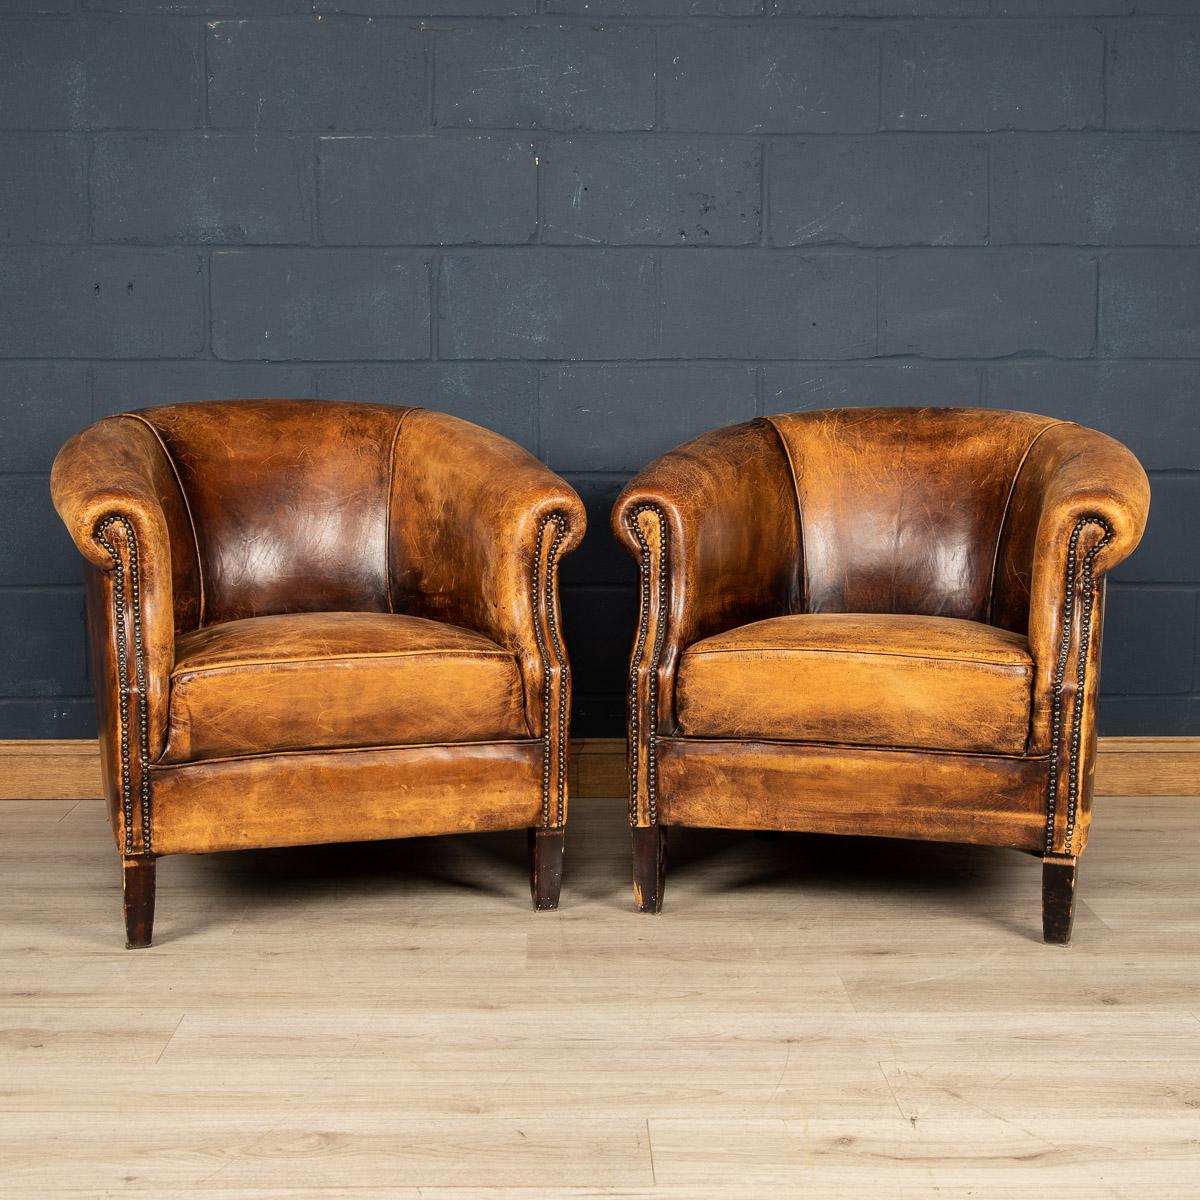 Showing superb patina and colour, this wonderful pair of club chairs were hand upholstered sheepskin leather in Holland by the finest craftsmen in the latter part of the 20th century.

Condition
In good condition - some wear consistent with